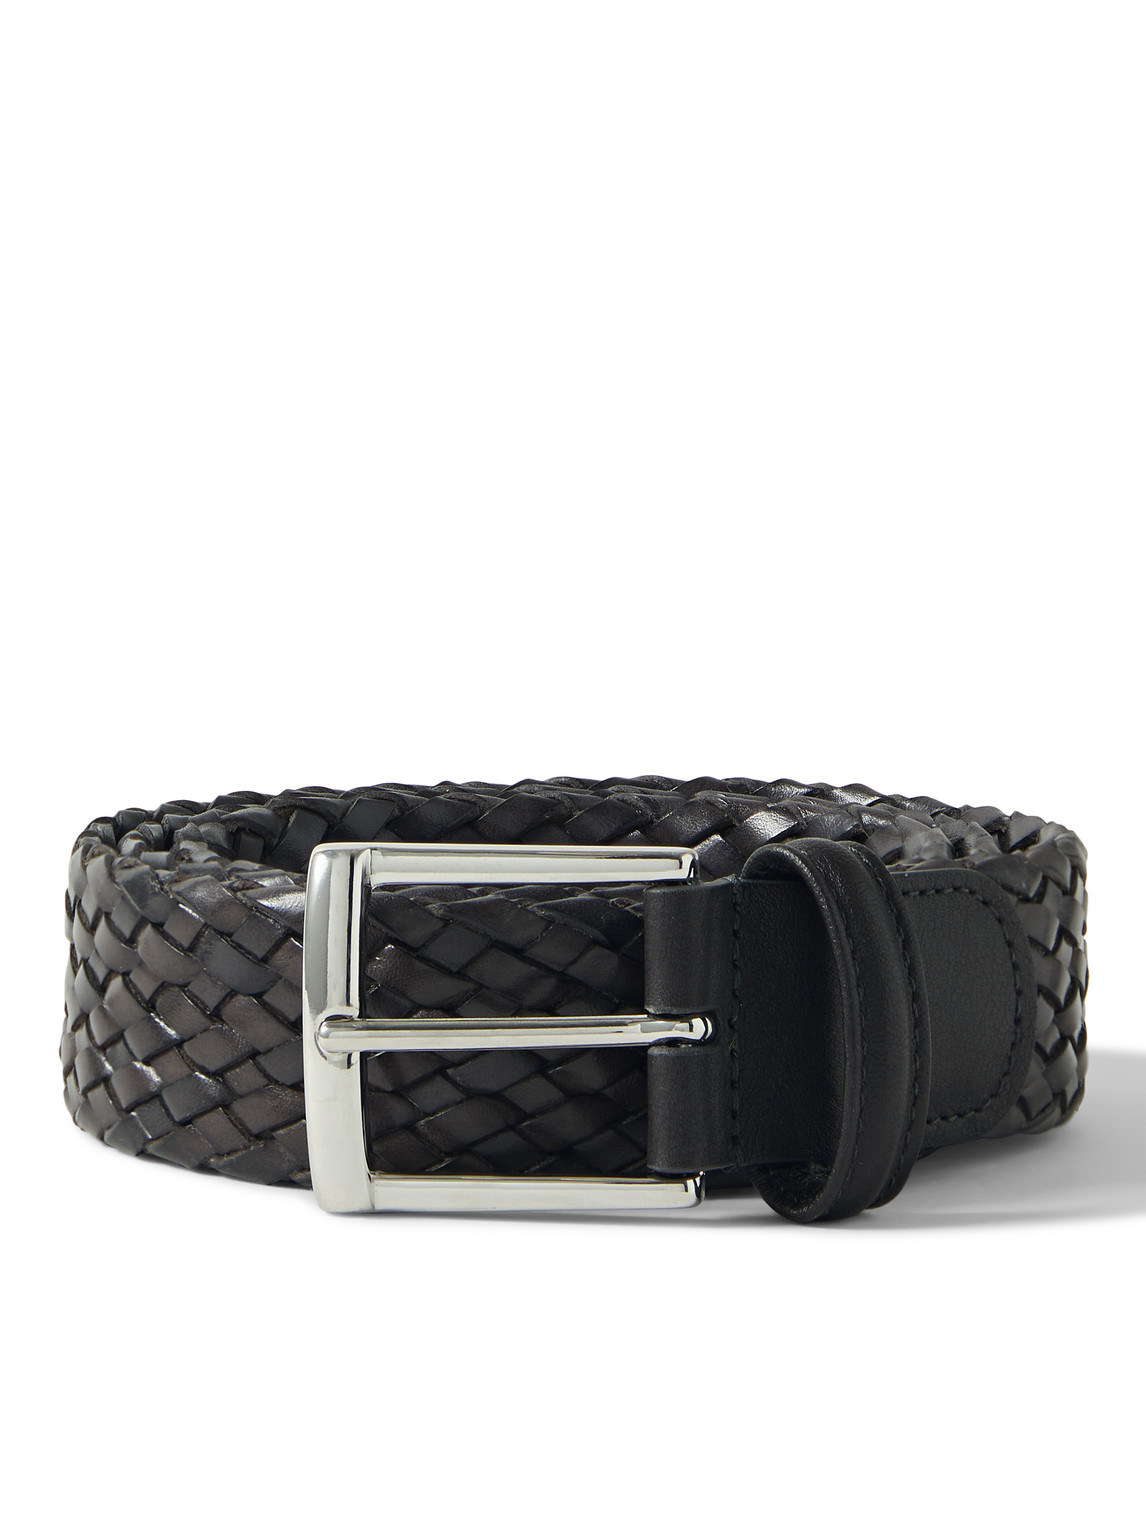 ANDERSON'S 3.5CM WOVEN LEATHER BELT 